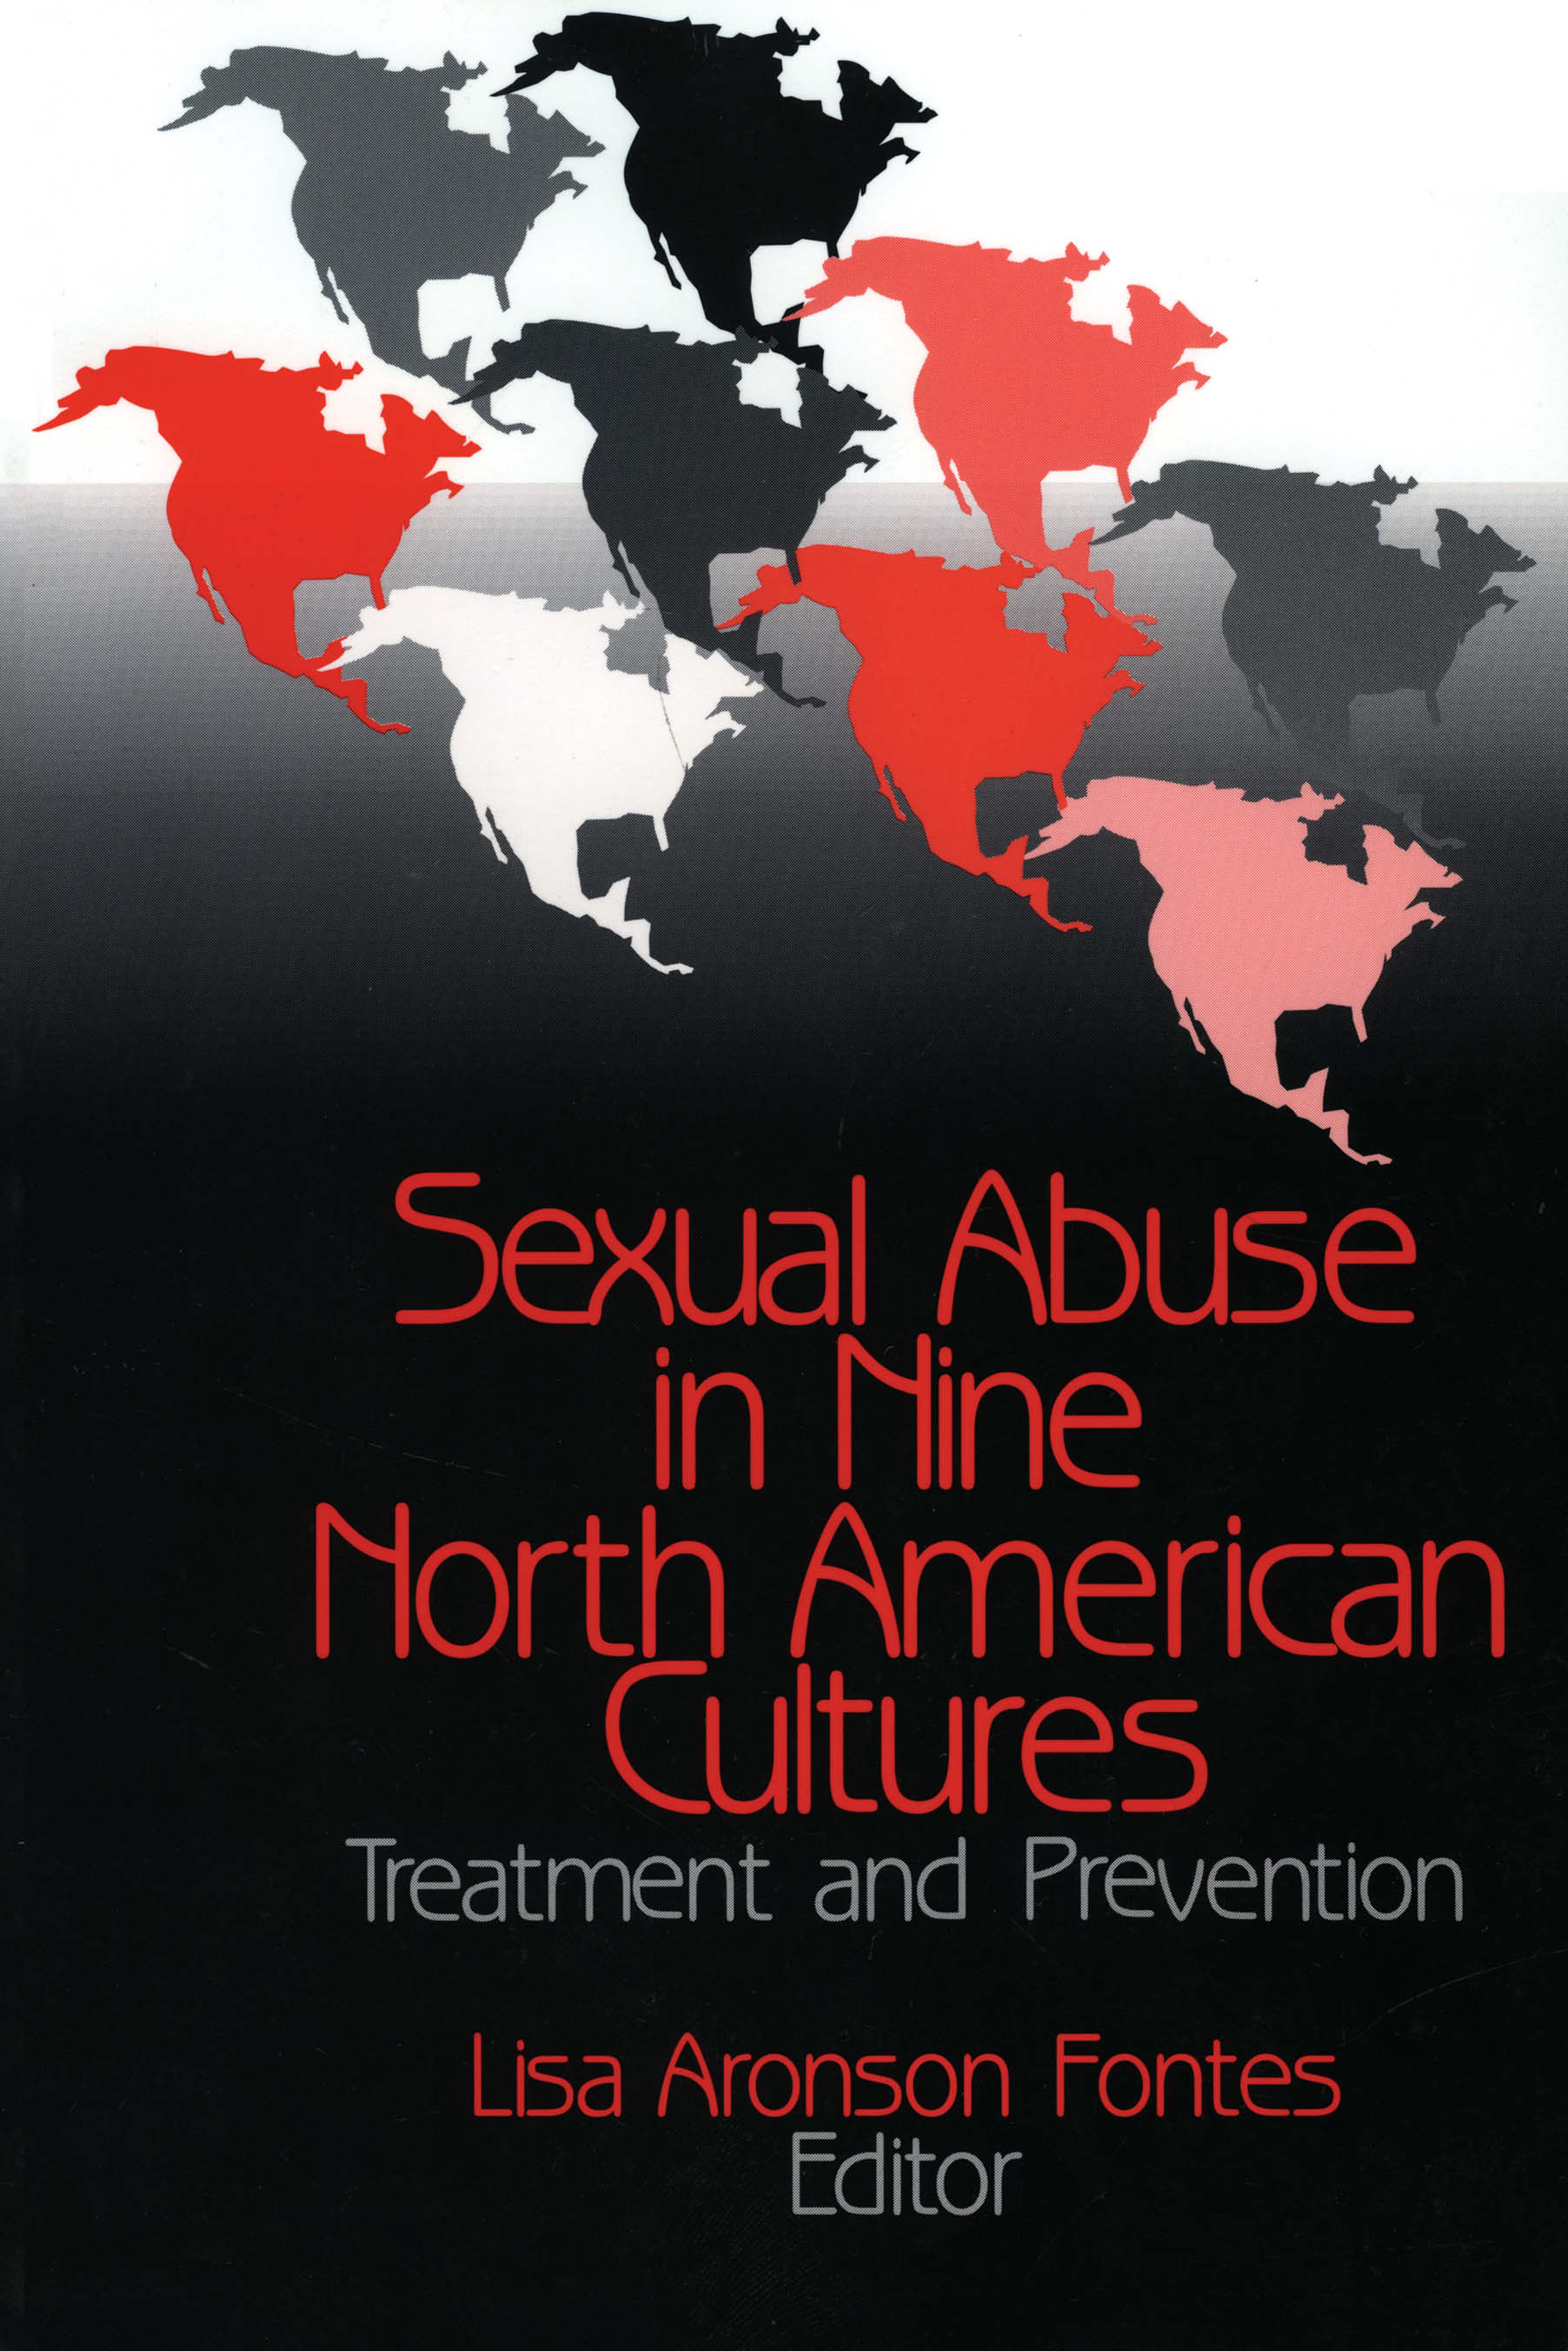 Sexual Abuse in Nine North American Cultures